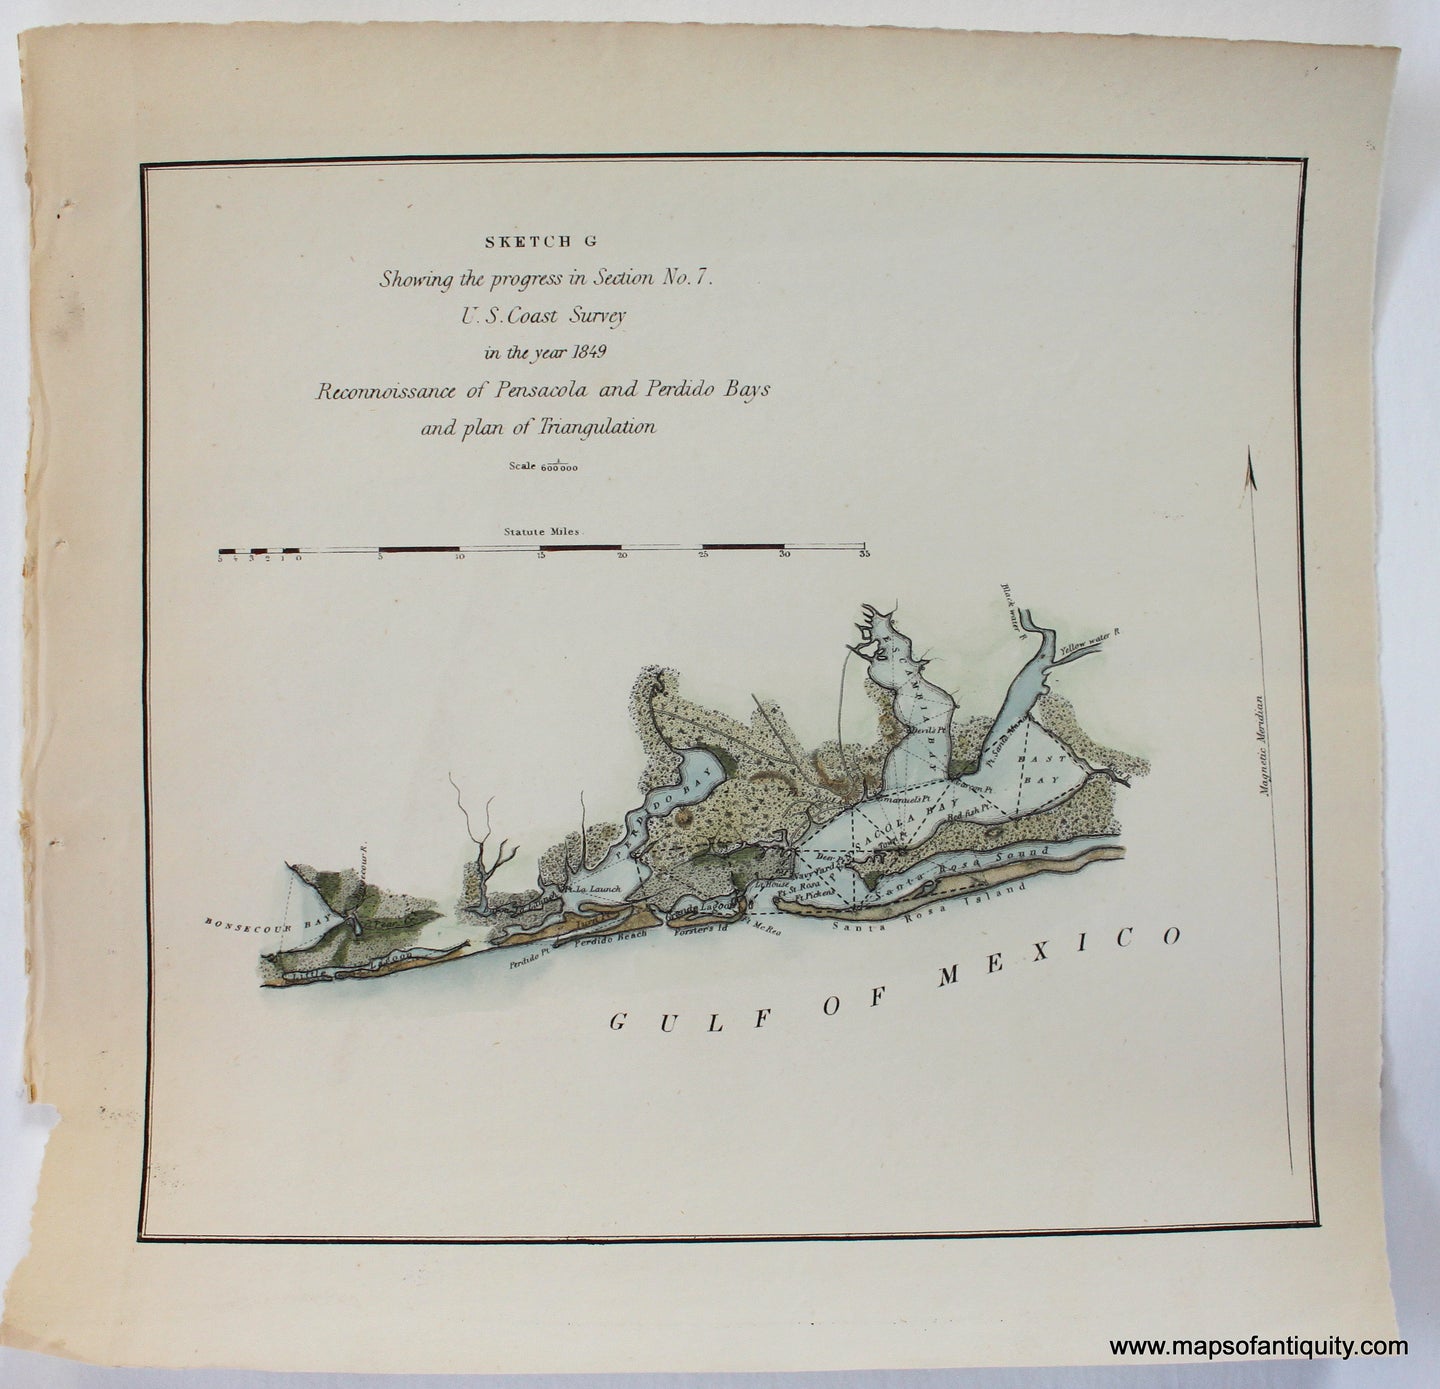 Antique-Map-Florida-Sketch-G-Showing-the-Progress-in-Section-No.-7-Reconnoissance-of-Pensacola-and-Perdido-Bays-and-plan-of-Triangulation-USCS-United-States-Coast-Survey-Coastal-Report-Chart-Charts-Maps-of-Antiquity